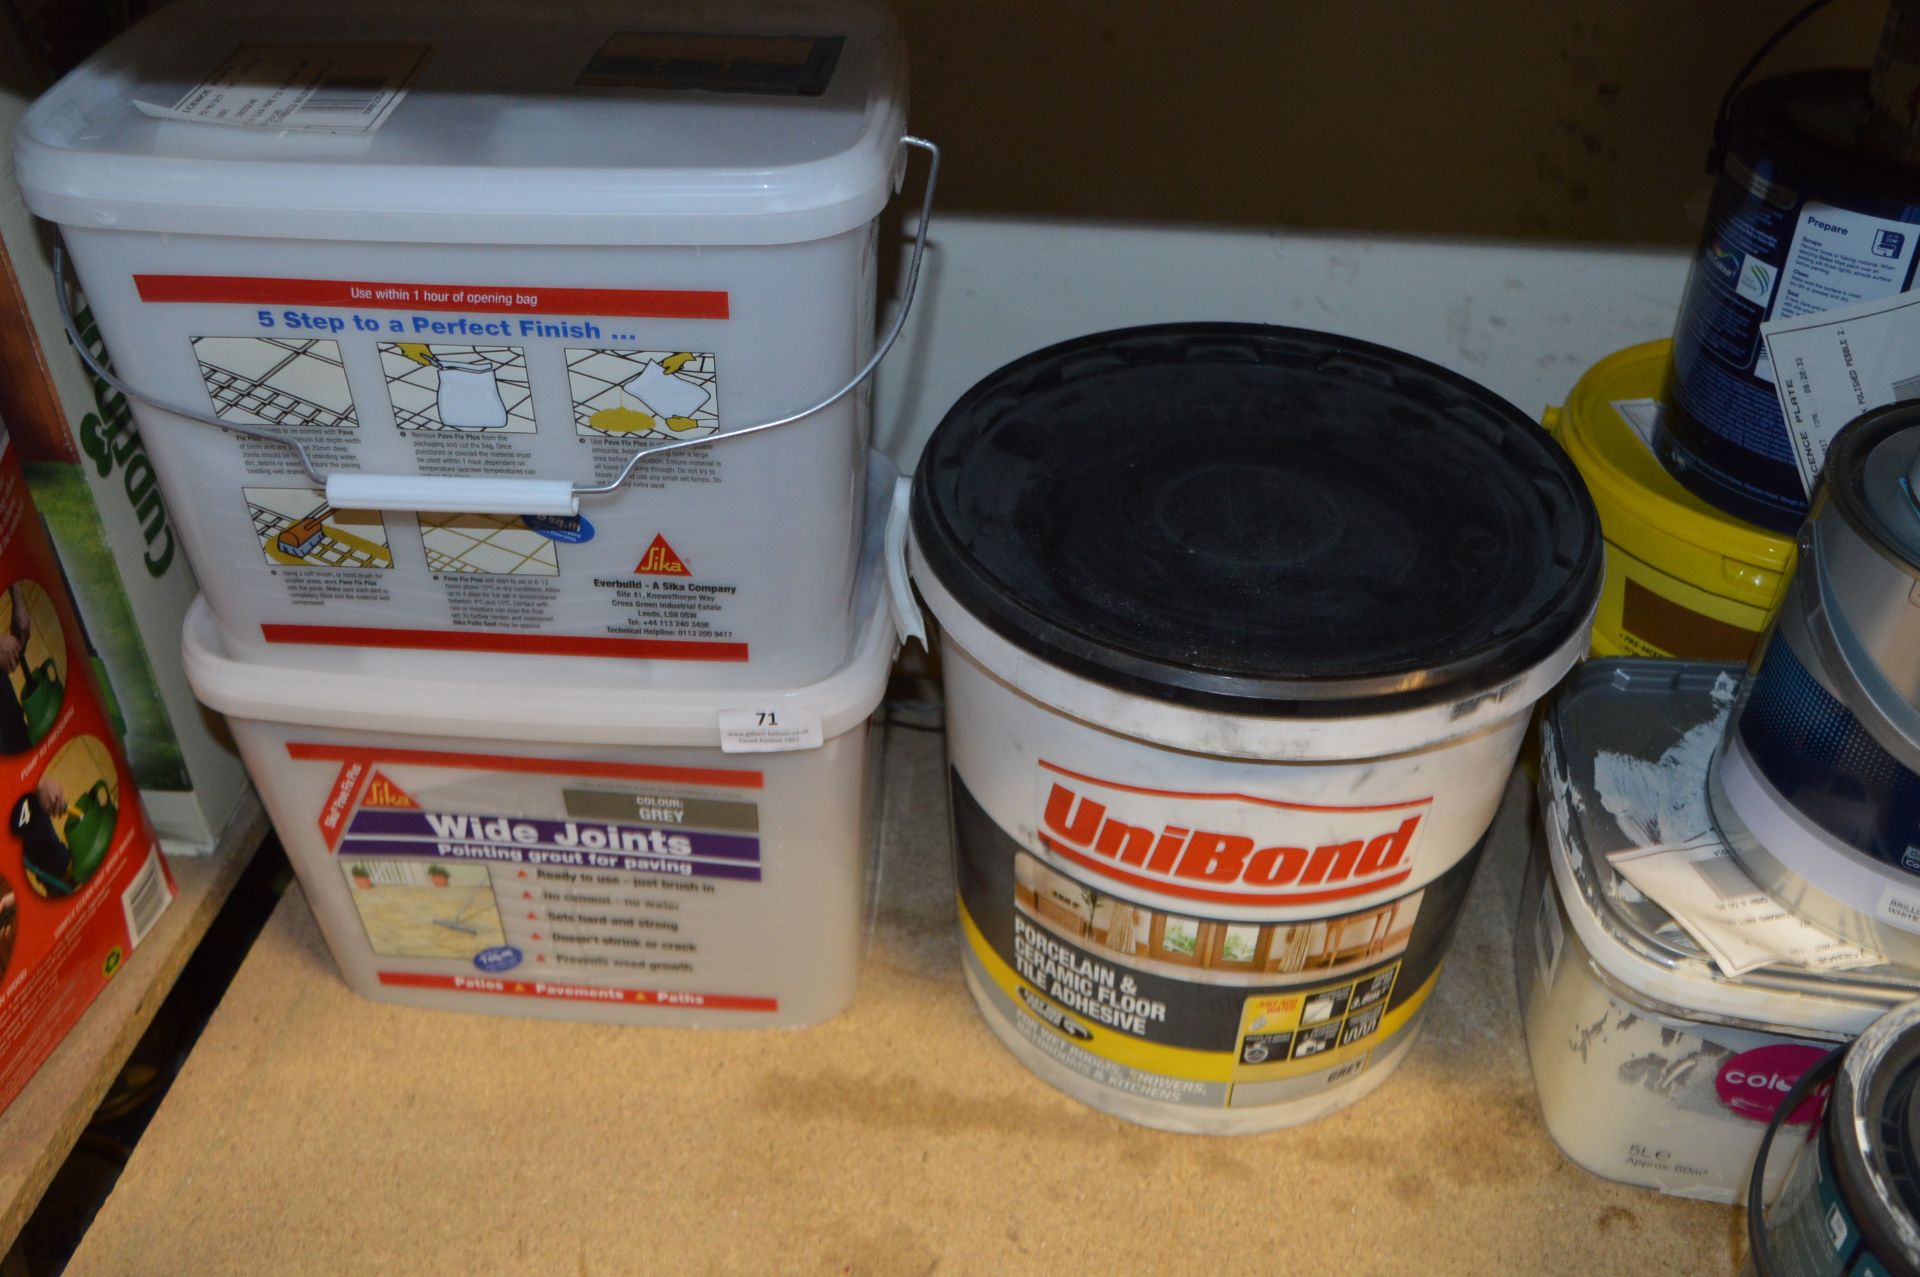 *Two Tubs of Sika Wide Joints Pointing and Grout for Pavers and a Tub of Porcelain Tile Adhesive